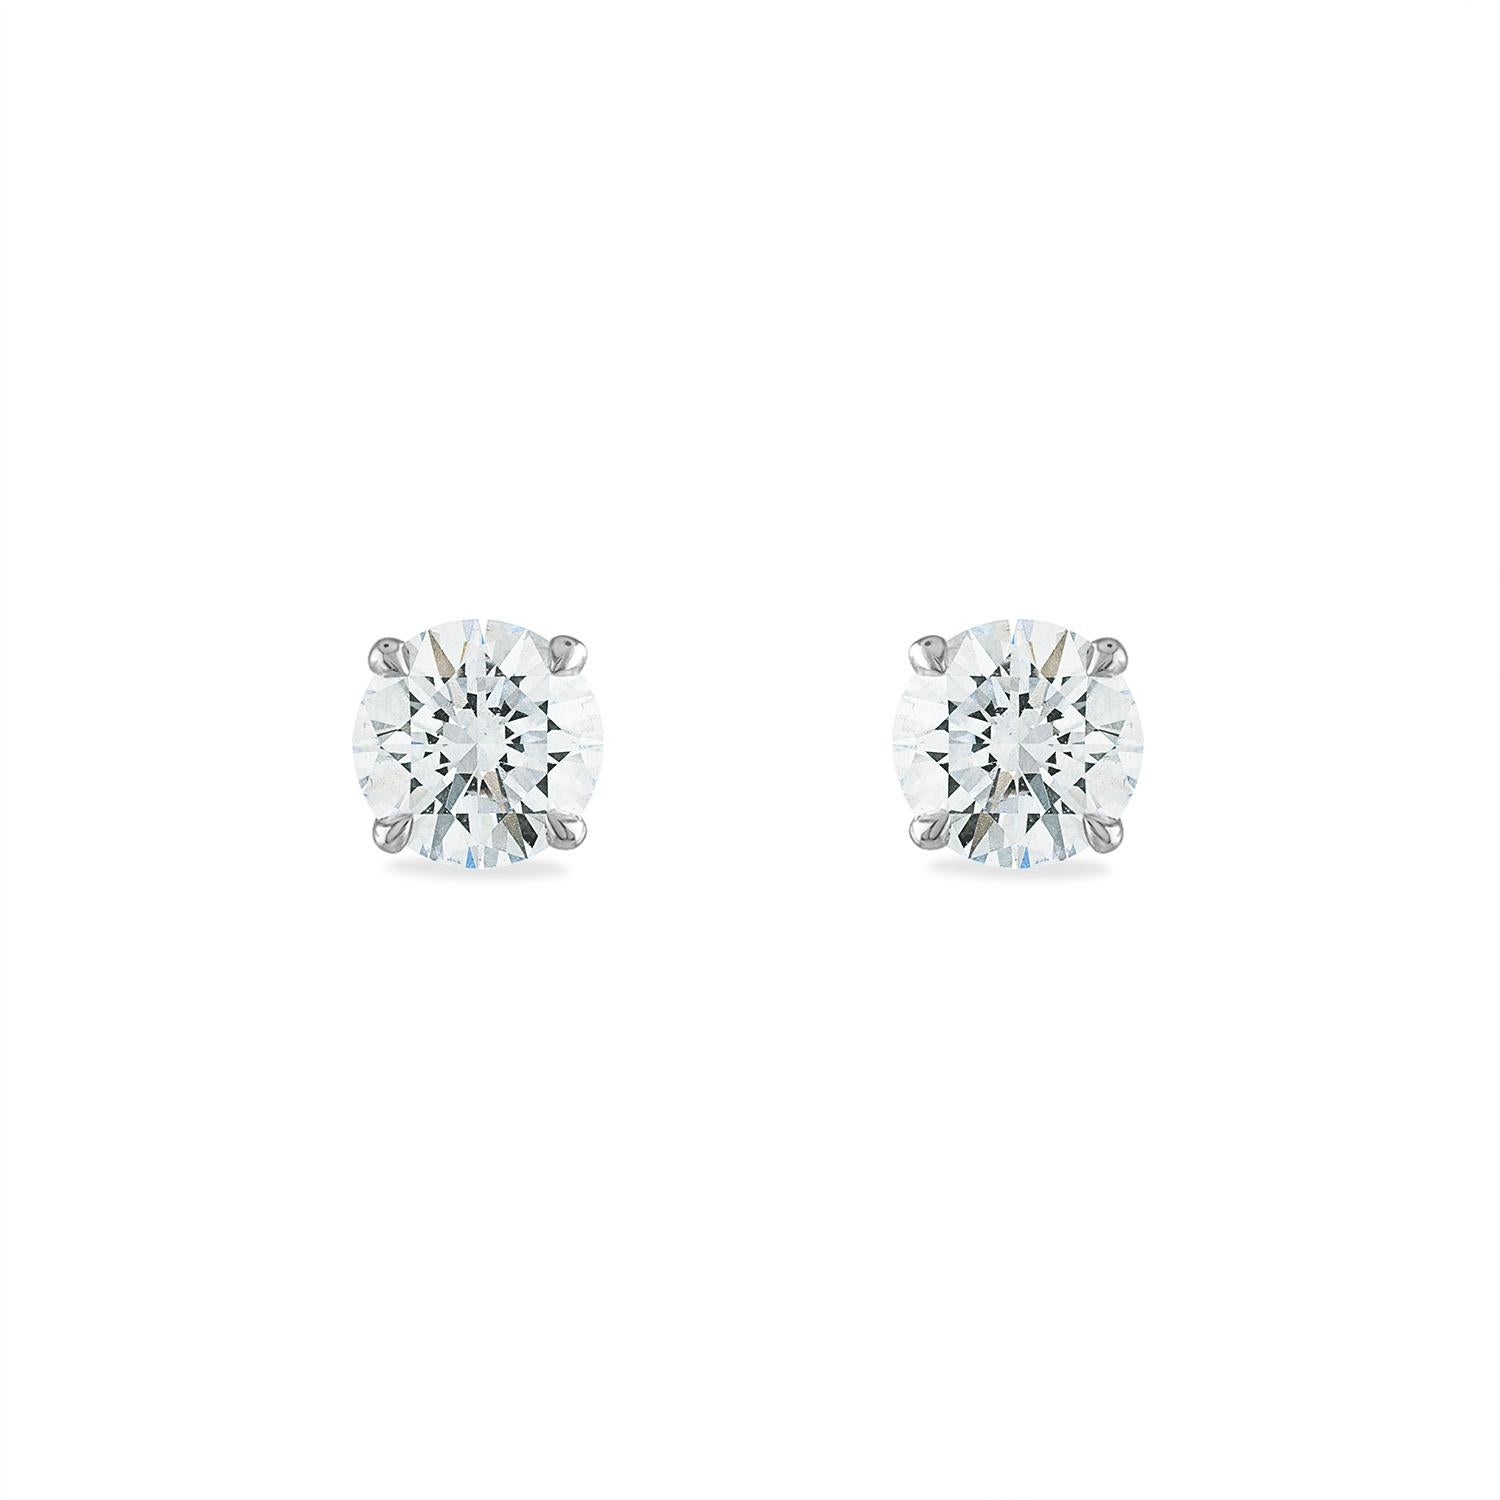 1.01 Ct Total weight Diamond stud earrings.
Both diamonds are GIA Certified, H color, SI1 Clarity. 
Both stones are rated Excellent Cut, Excellent Polish, and Excellent Symmetry - the highest possible score within the GIA grading evaluation. 

Set